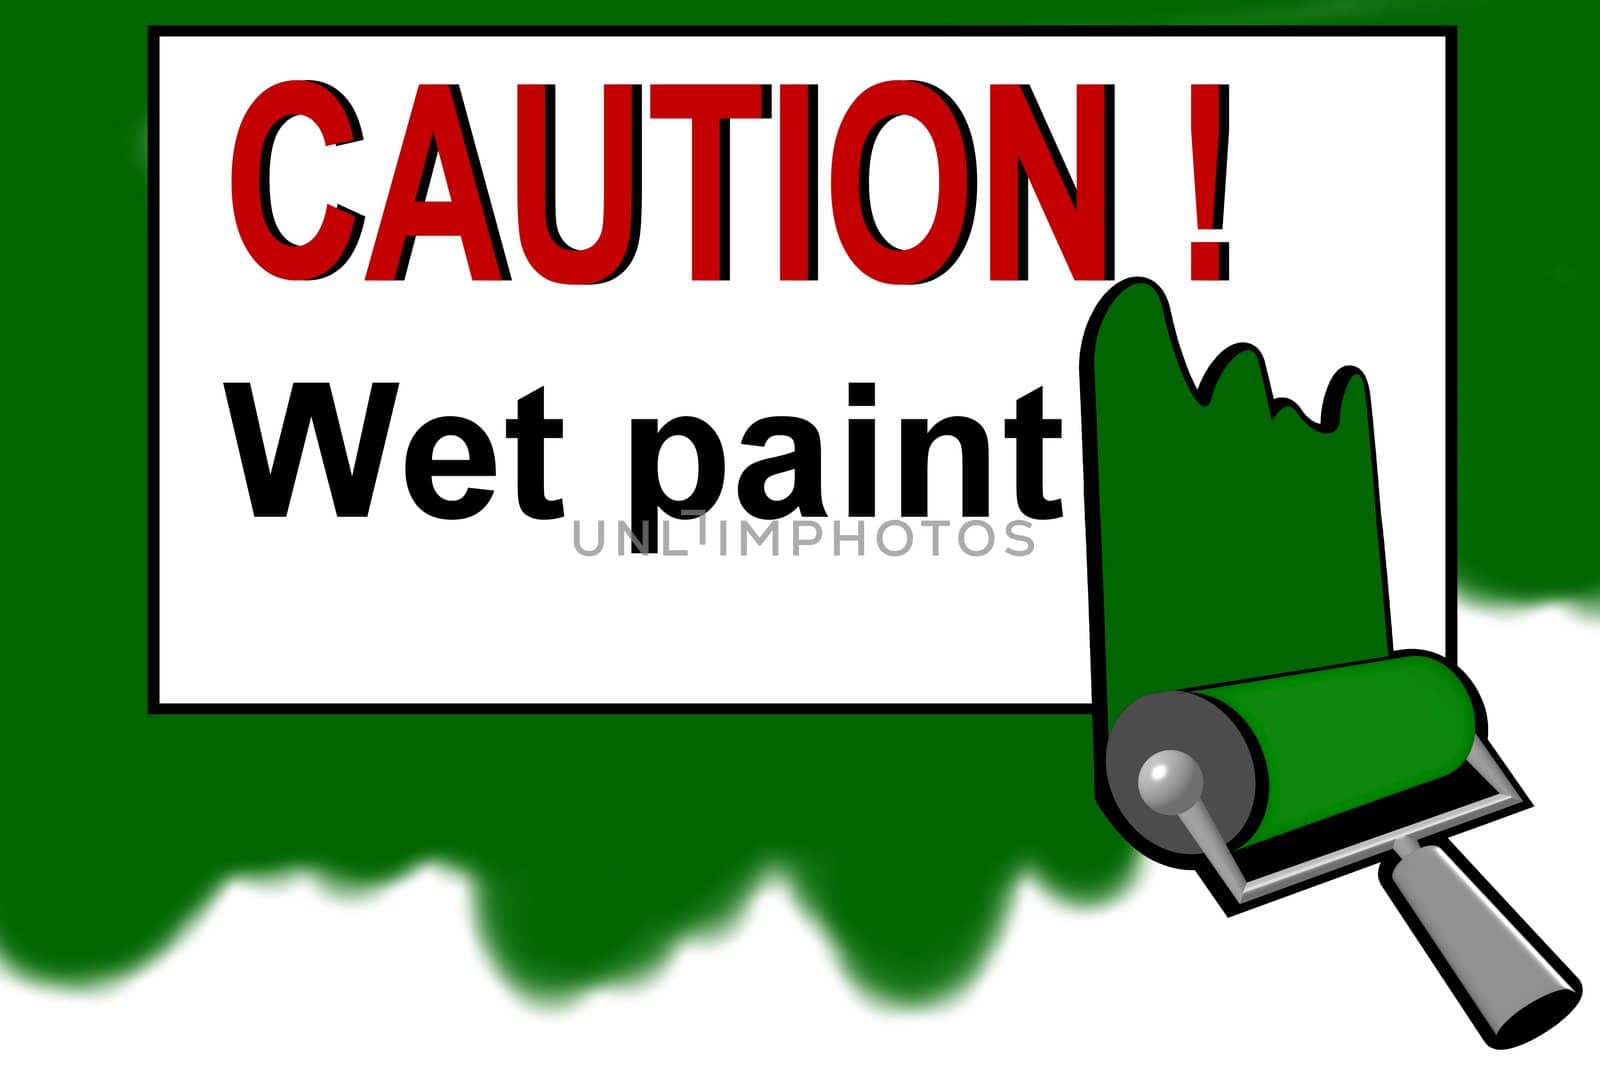 Caution - wet paint warning sign